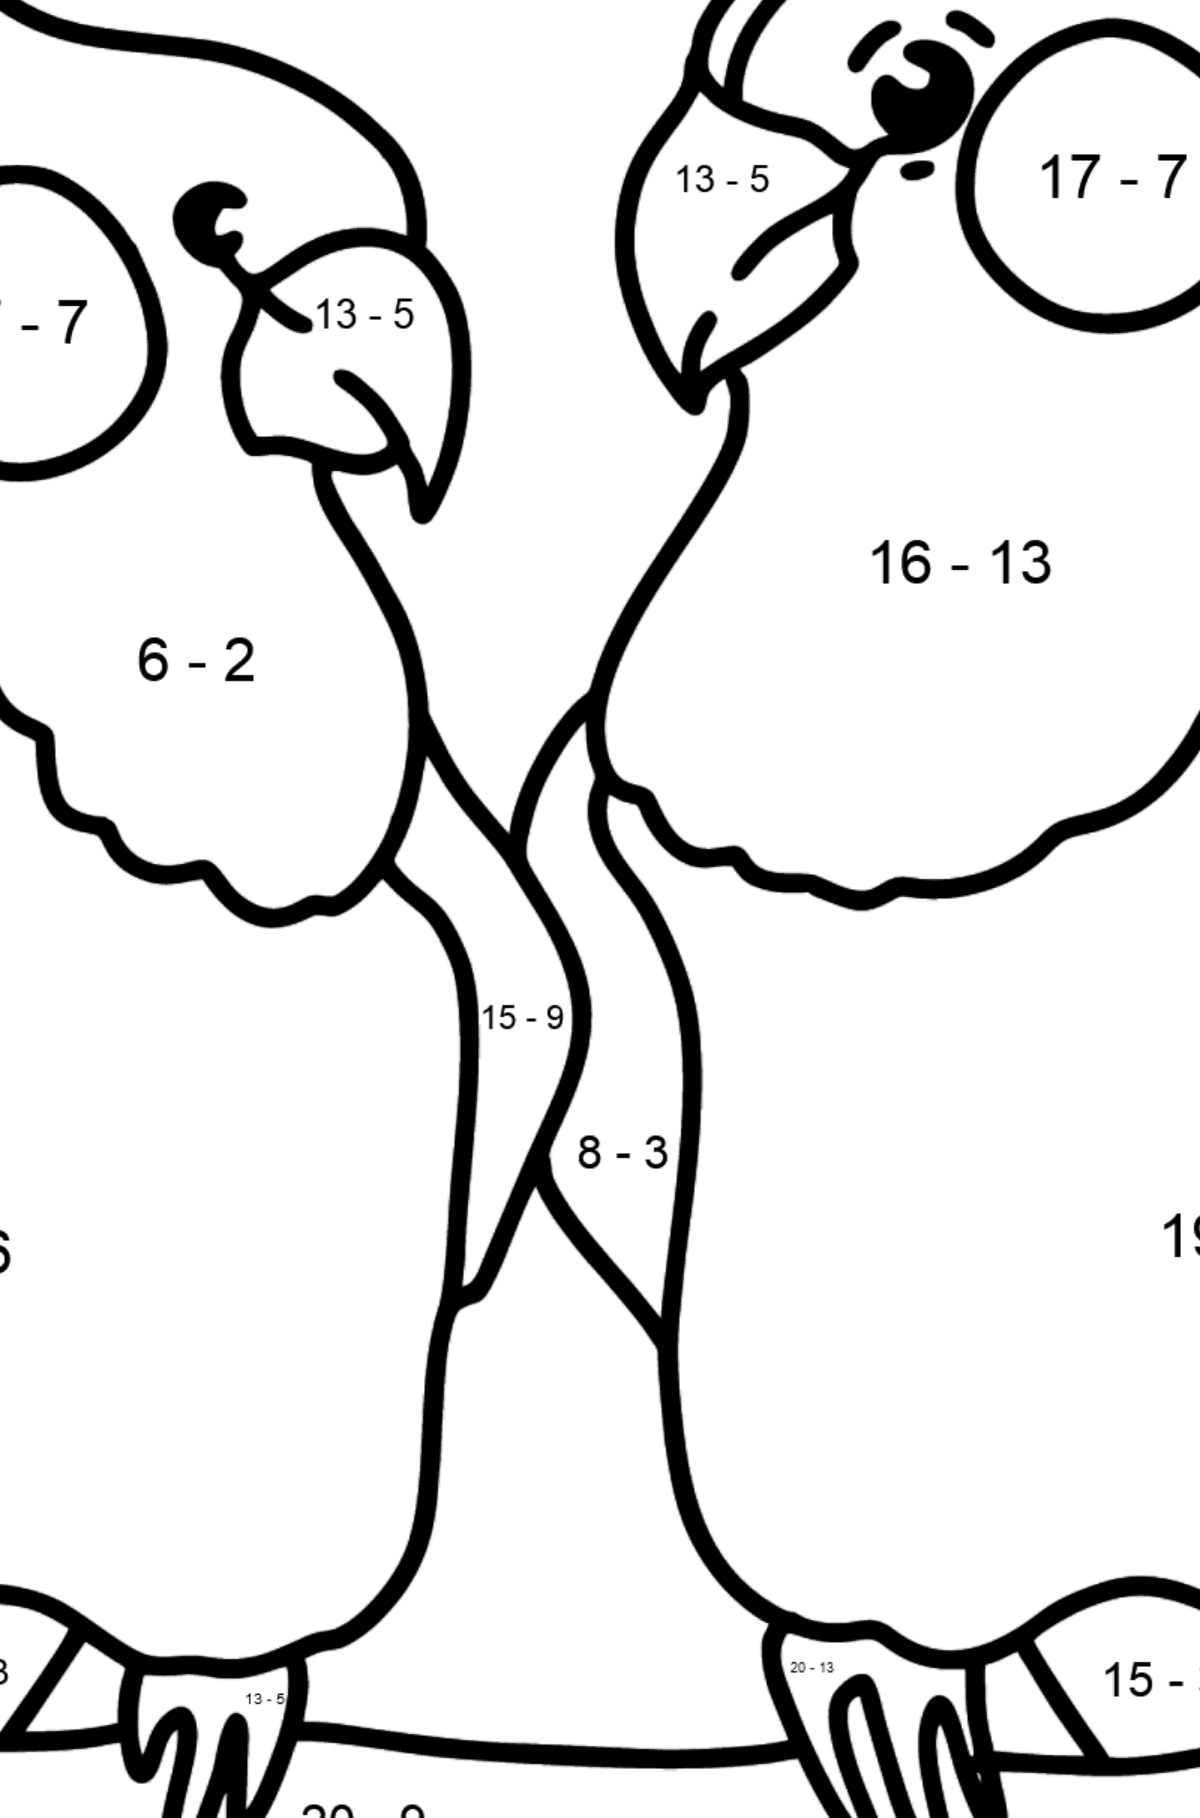 Lovebird Parrots coloring page - Math Coloring - Subtraction for Kids